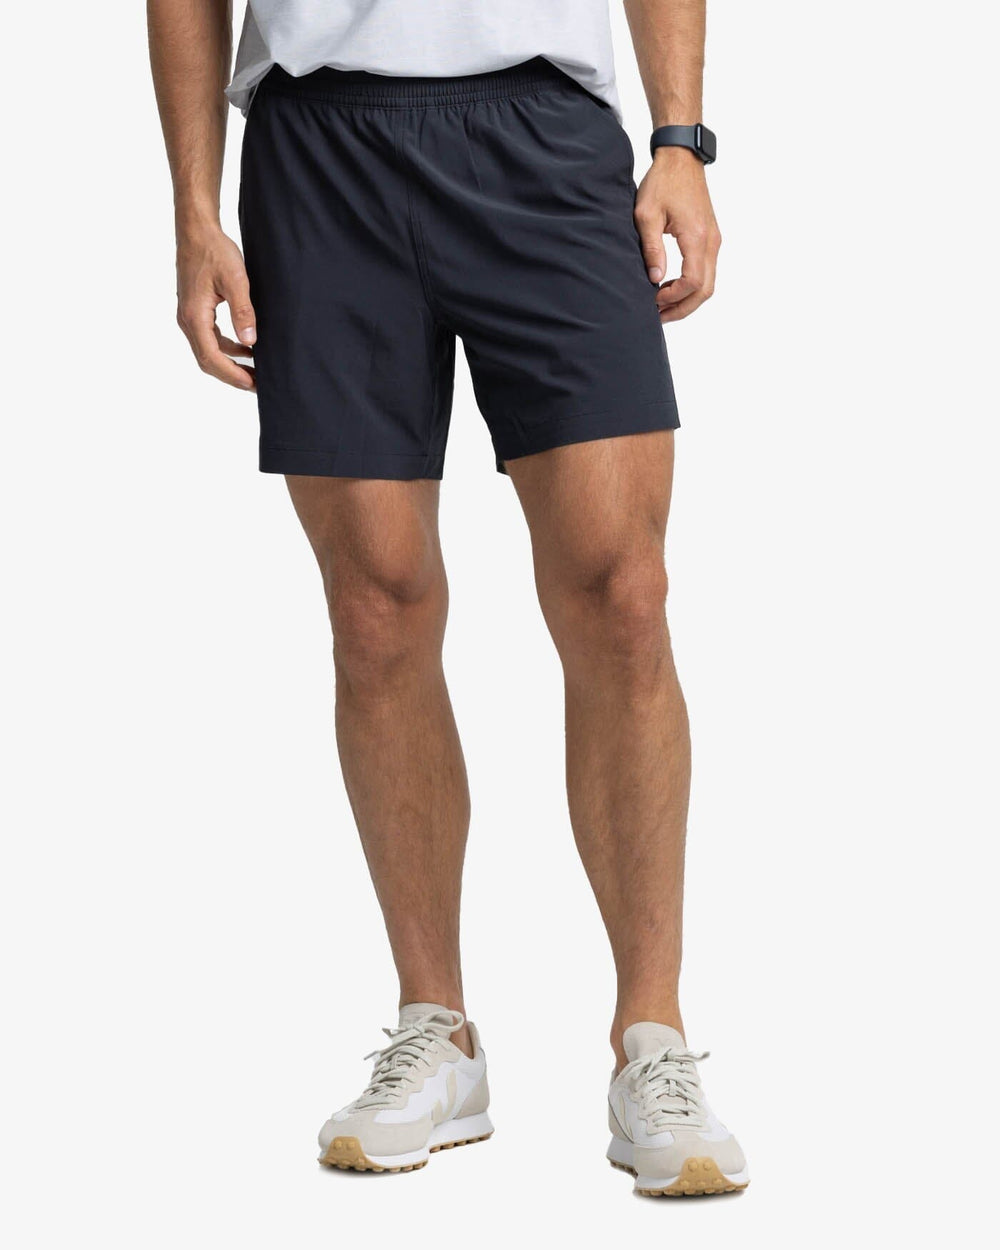 Men's 6 Inch Active Short with Liner | Southern Tide